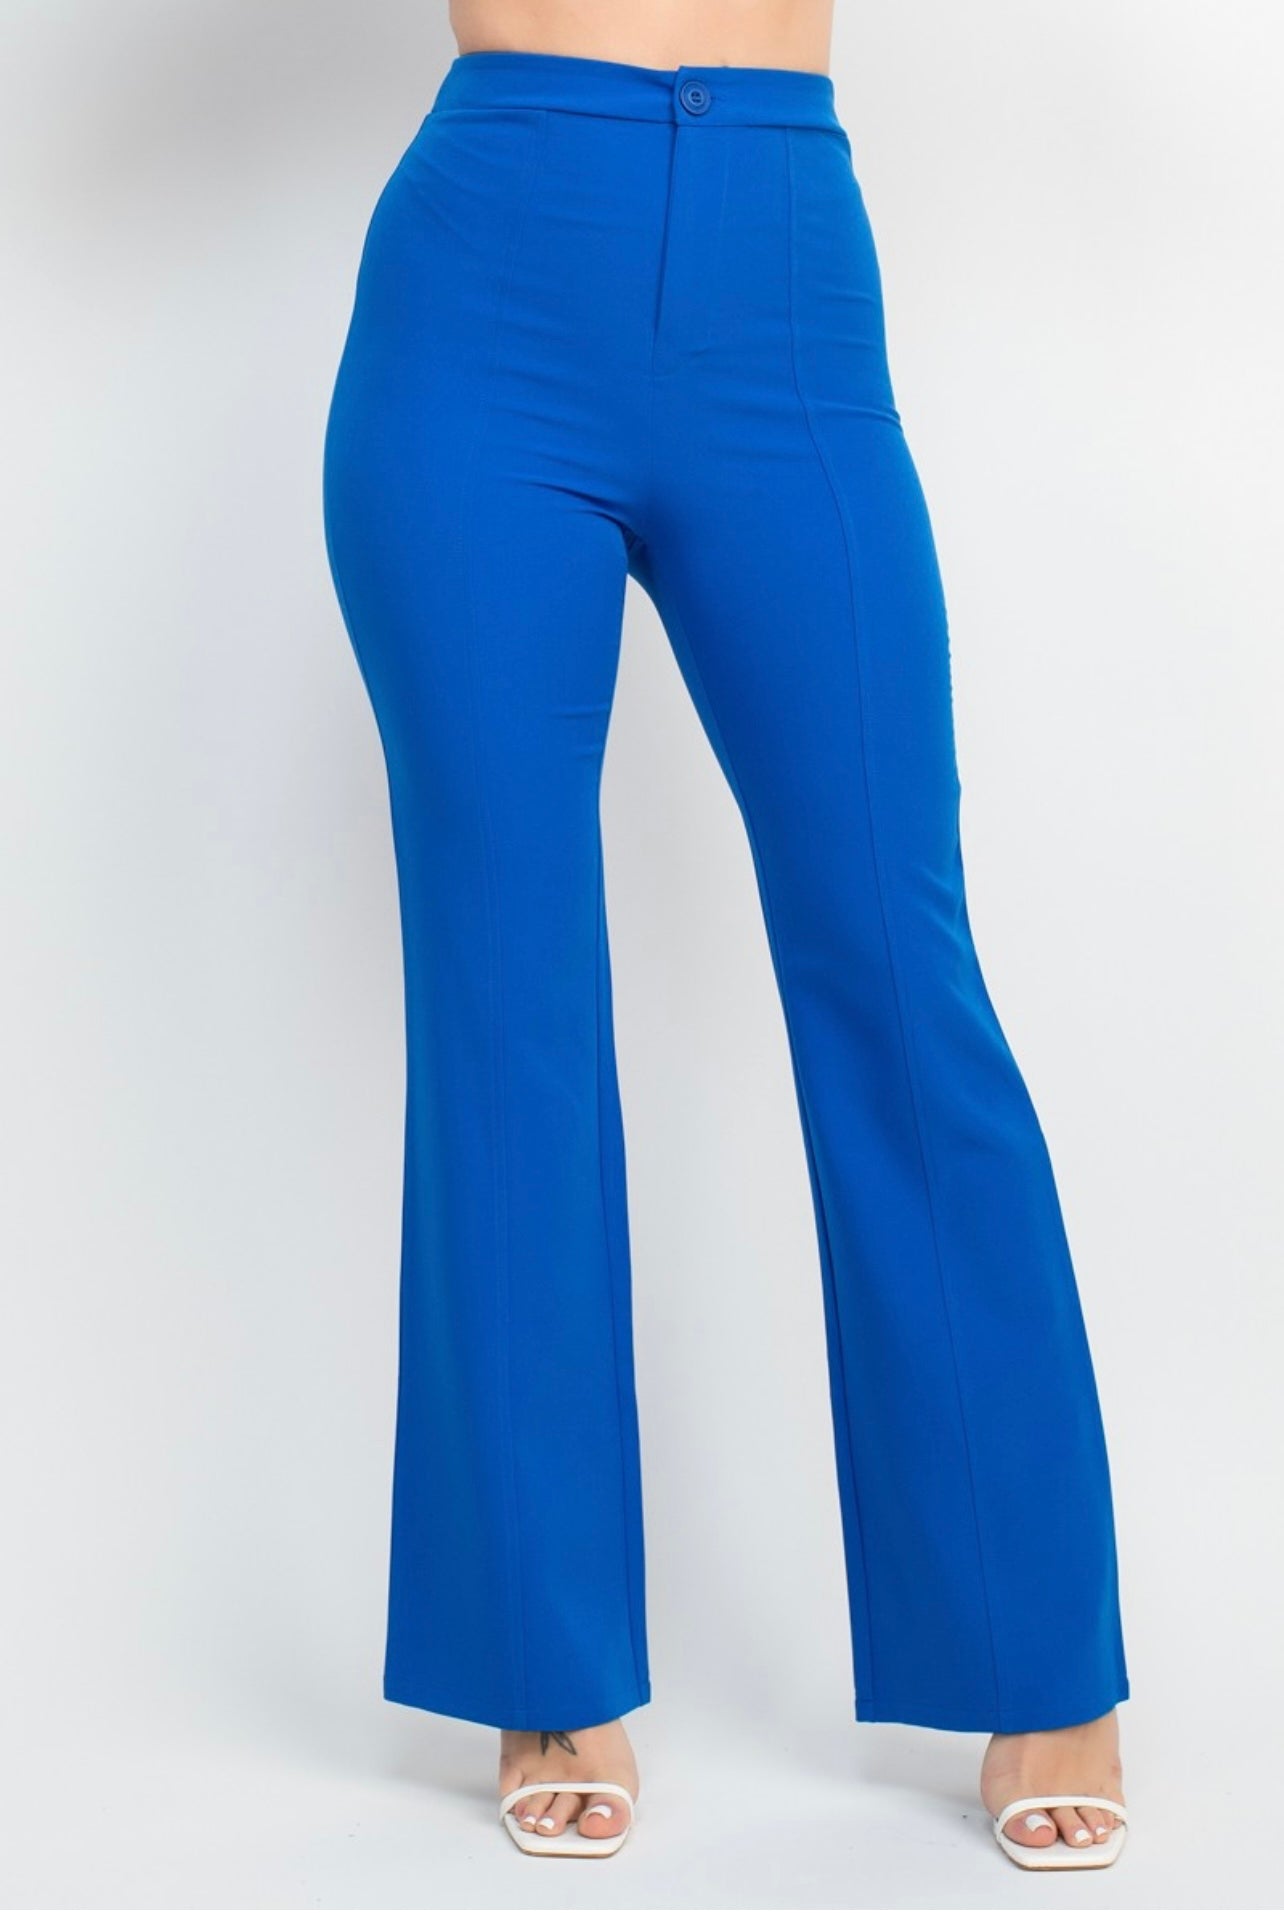 Lexy Fit Flare Pants (Royal)